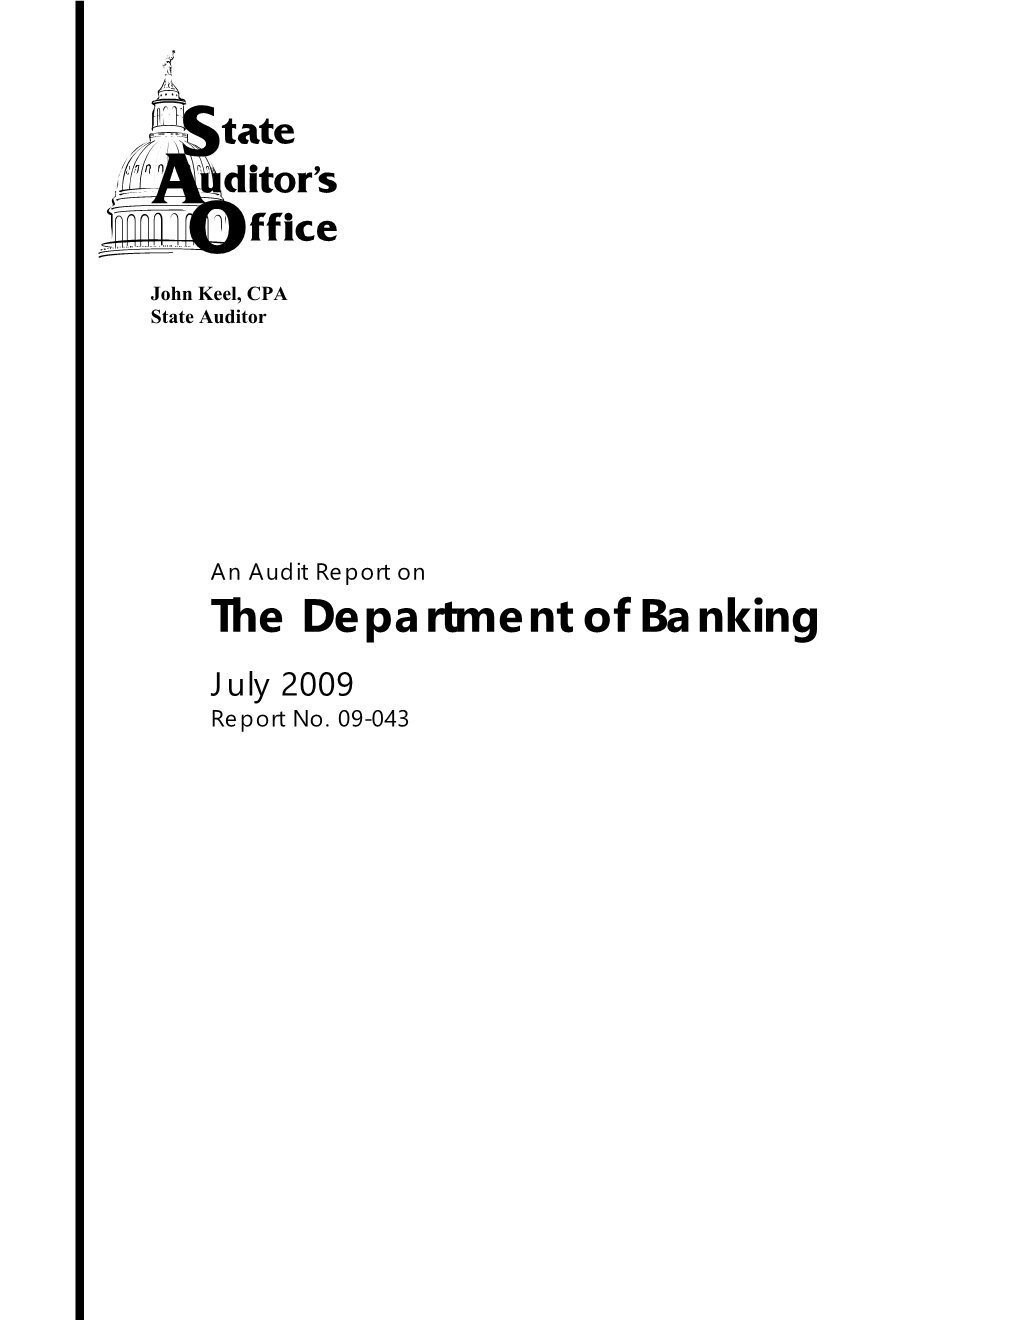 An Audit Report on the Department of Banking July 2009 Report No